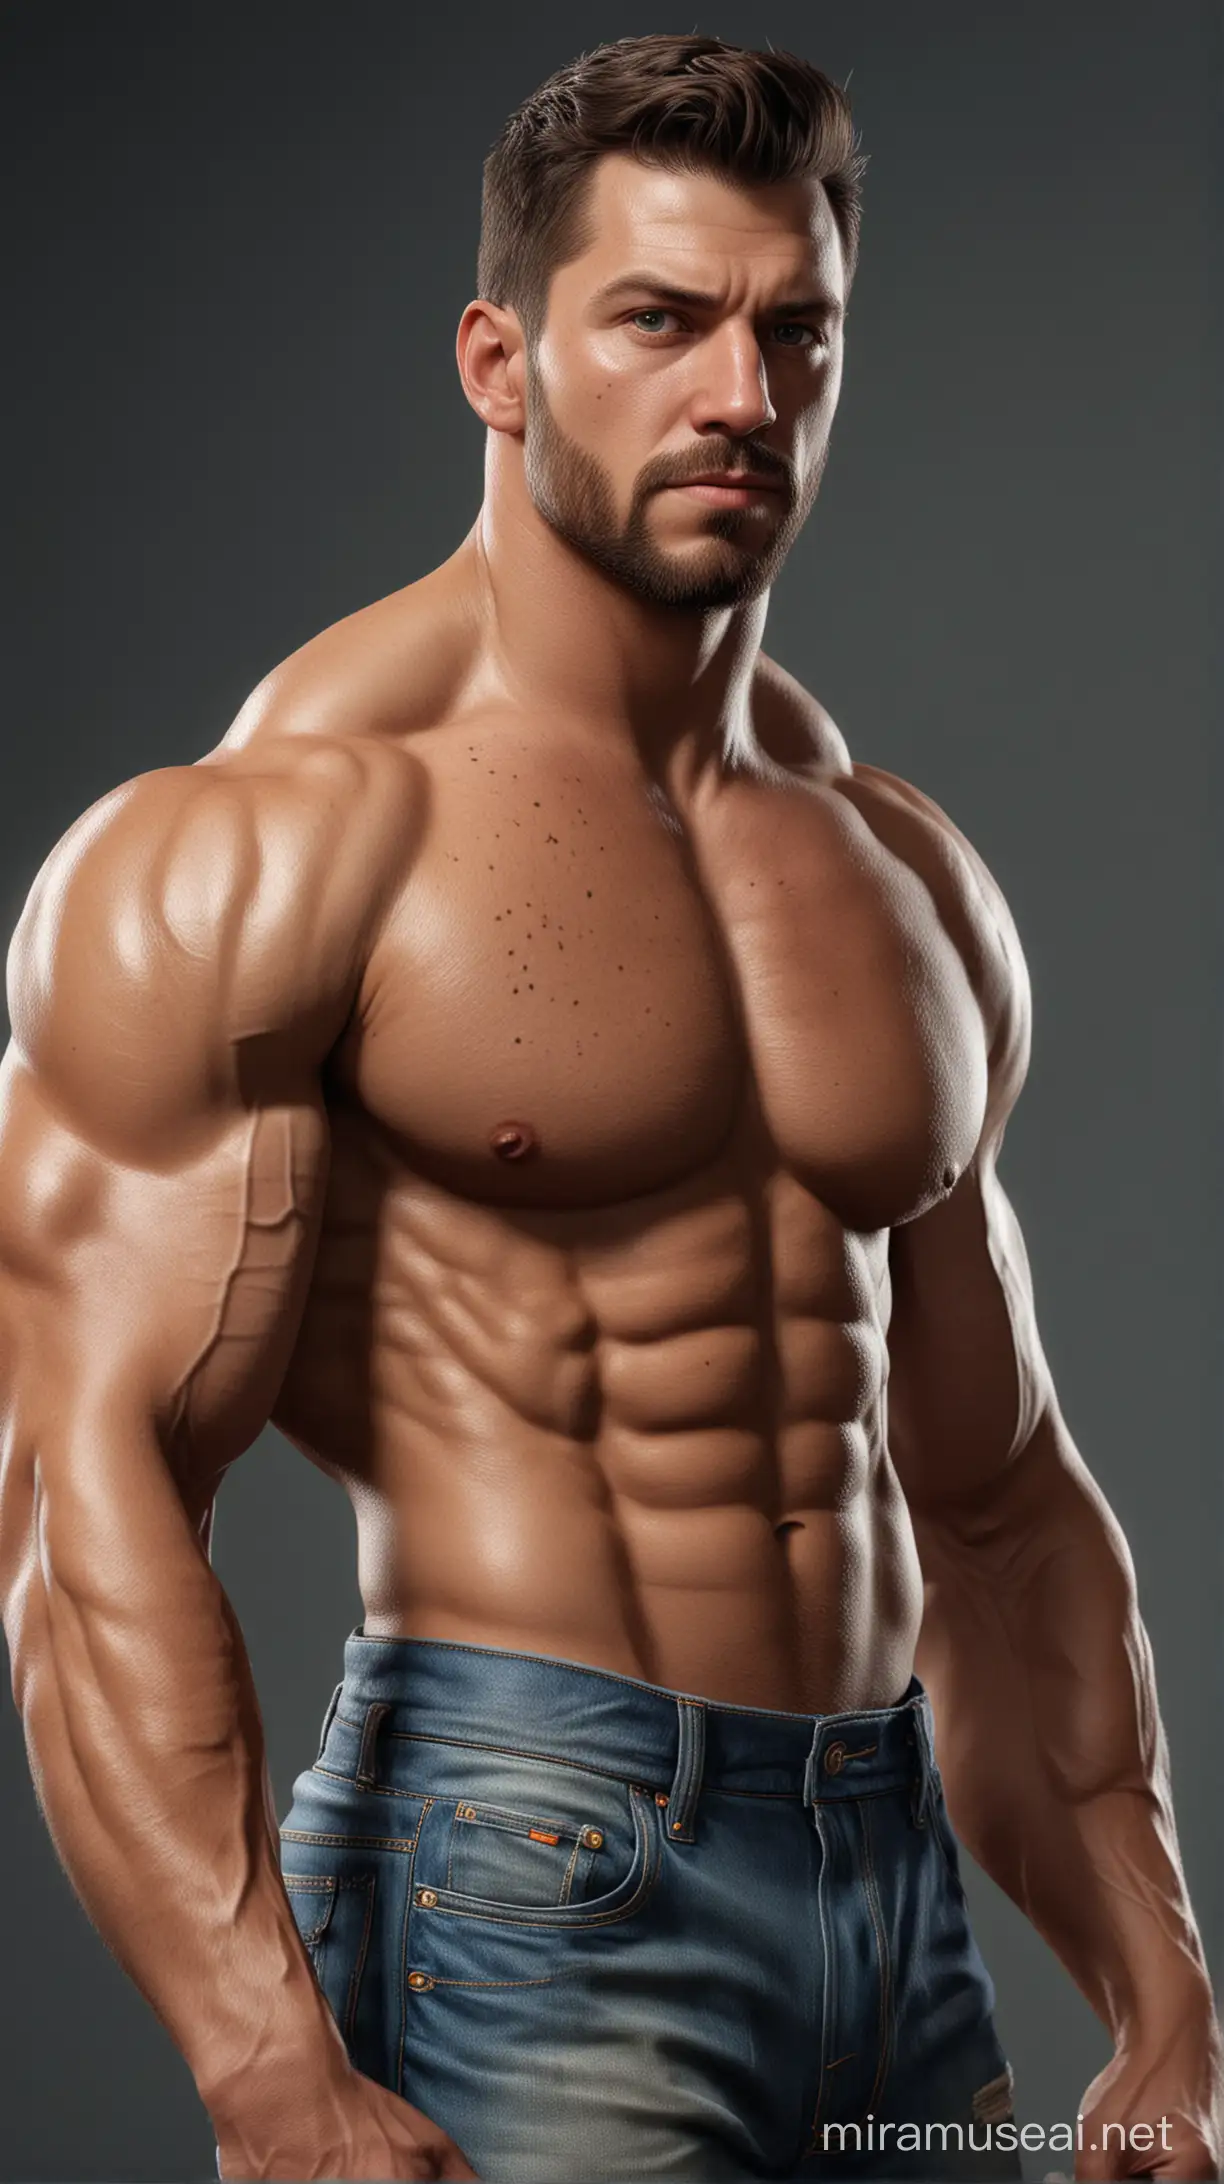 I am looking for a 3D, ultra high realistic, Unreal Engine render of a american man showing  his muscles